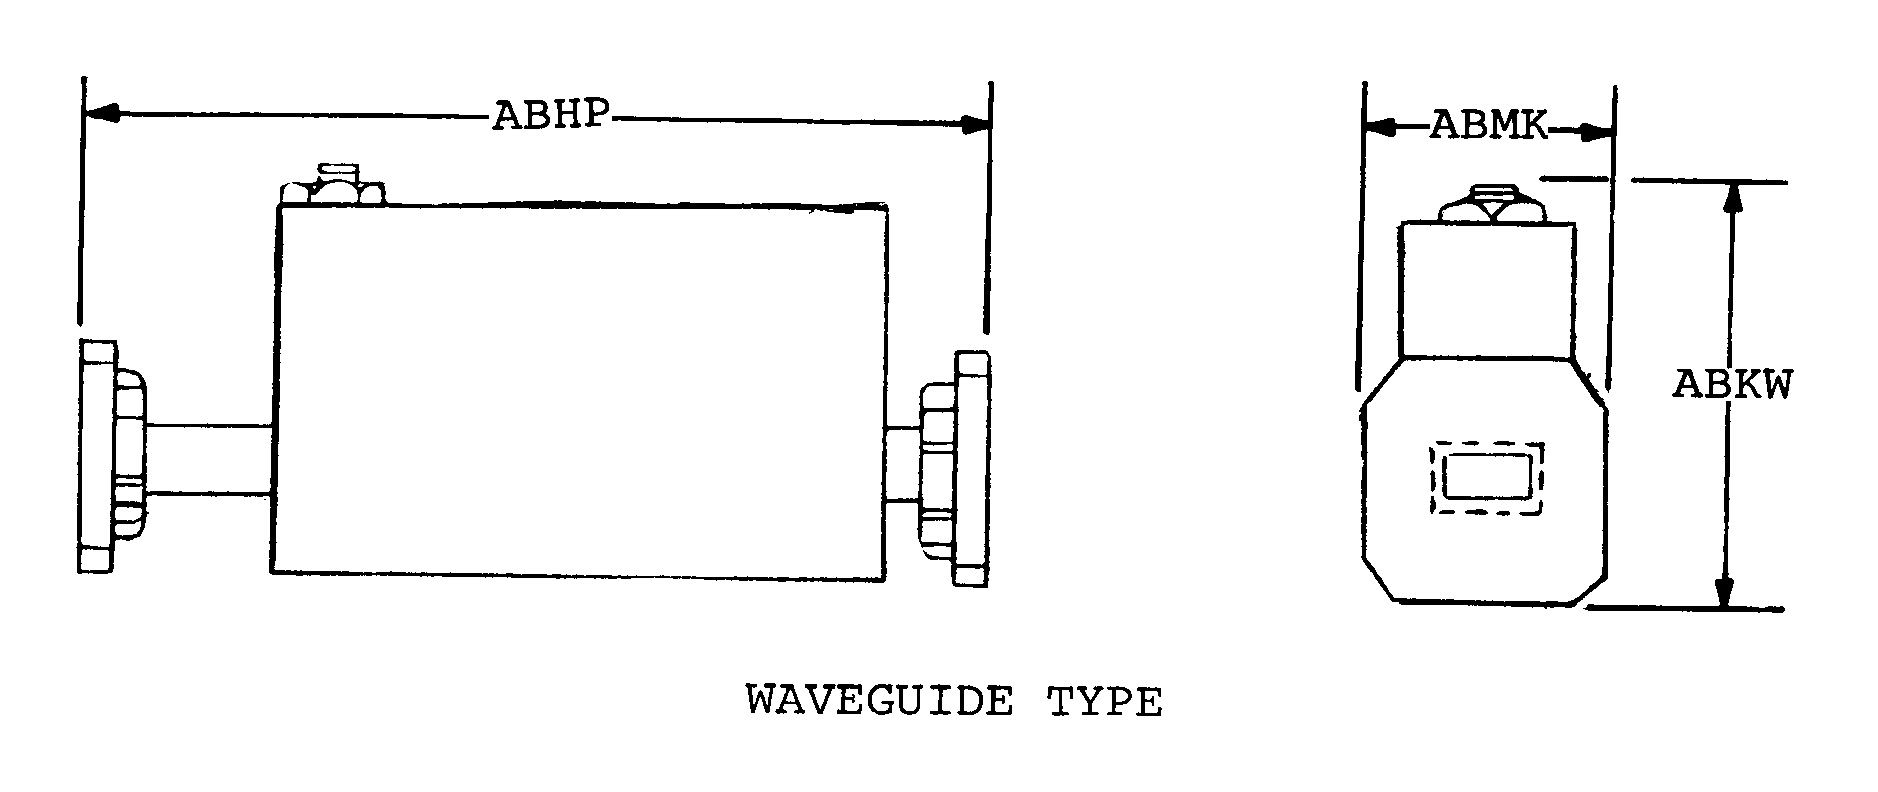 WAVEGUIDE TYPE style nsn 5985-00-544-8599